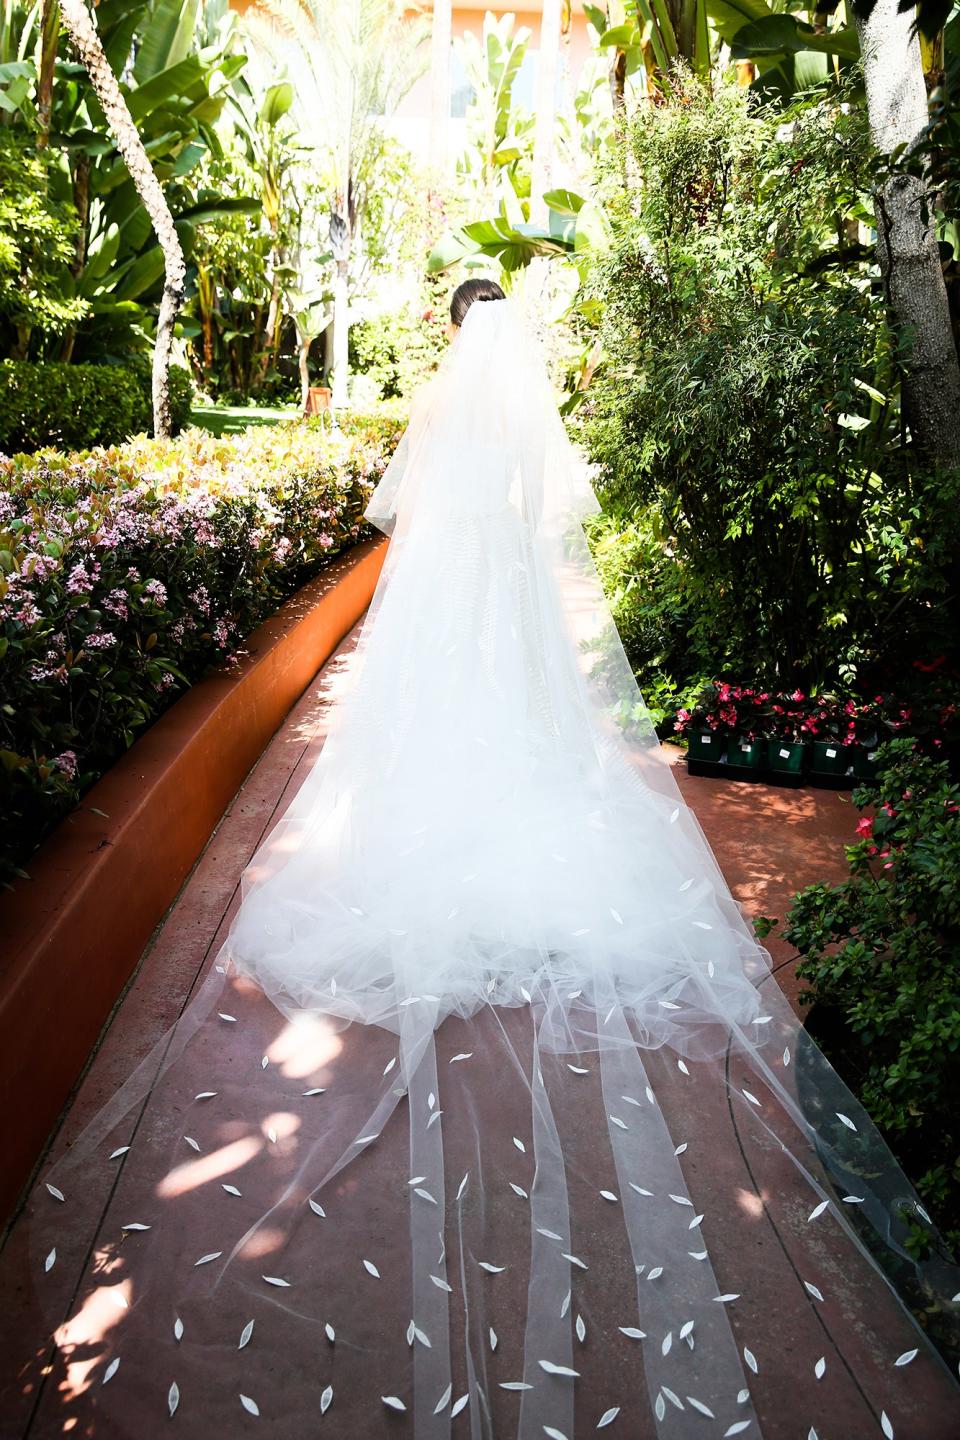 The bride wore Oscar de la Renta, inspired by her grandmother, for her greenery-filled ceremony at the Beverly Hills Hotel.